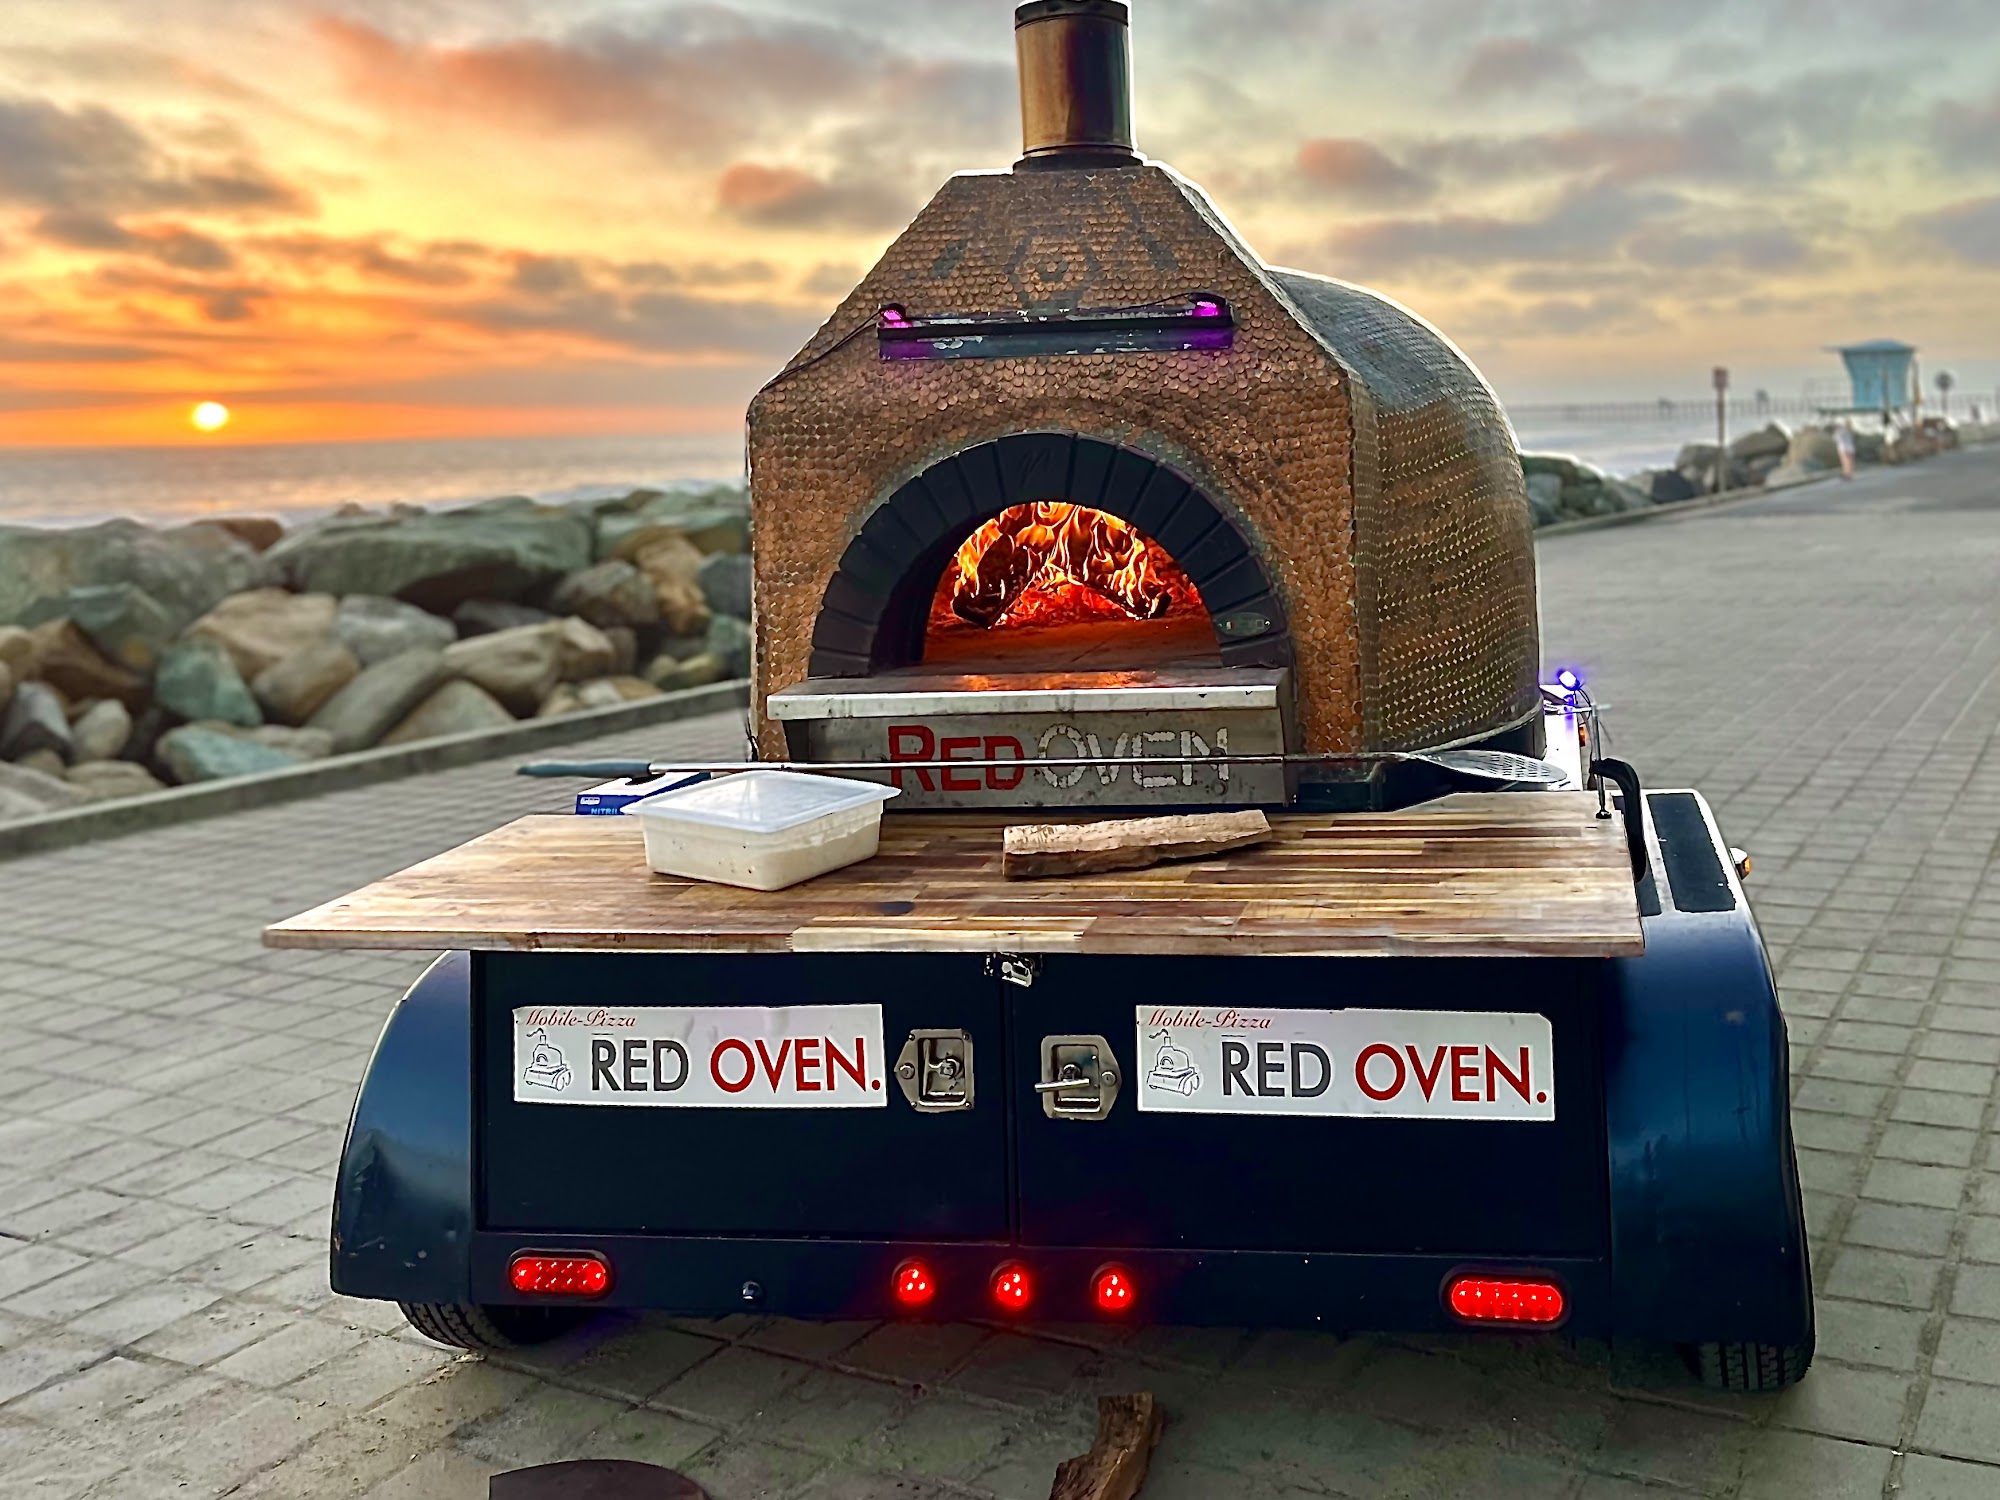 RED OVEN PIZZA